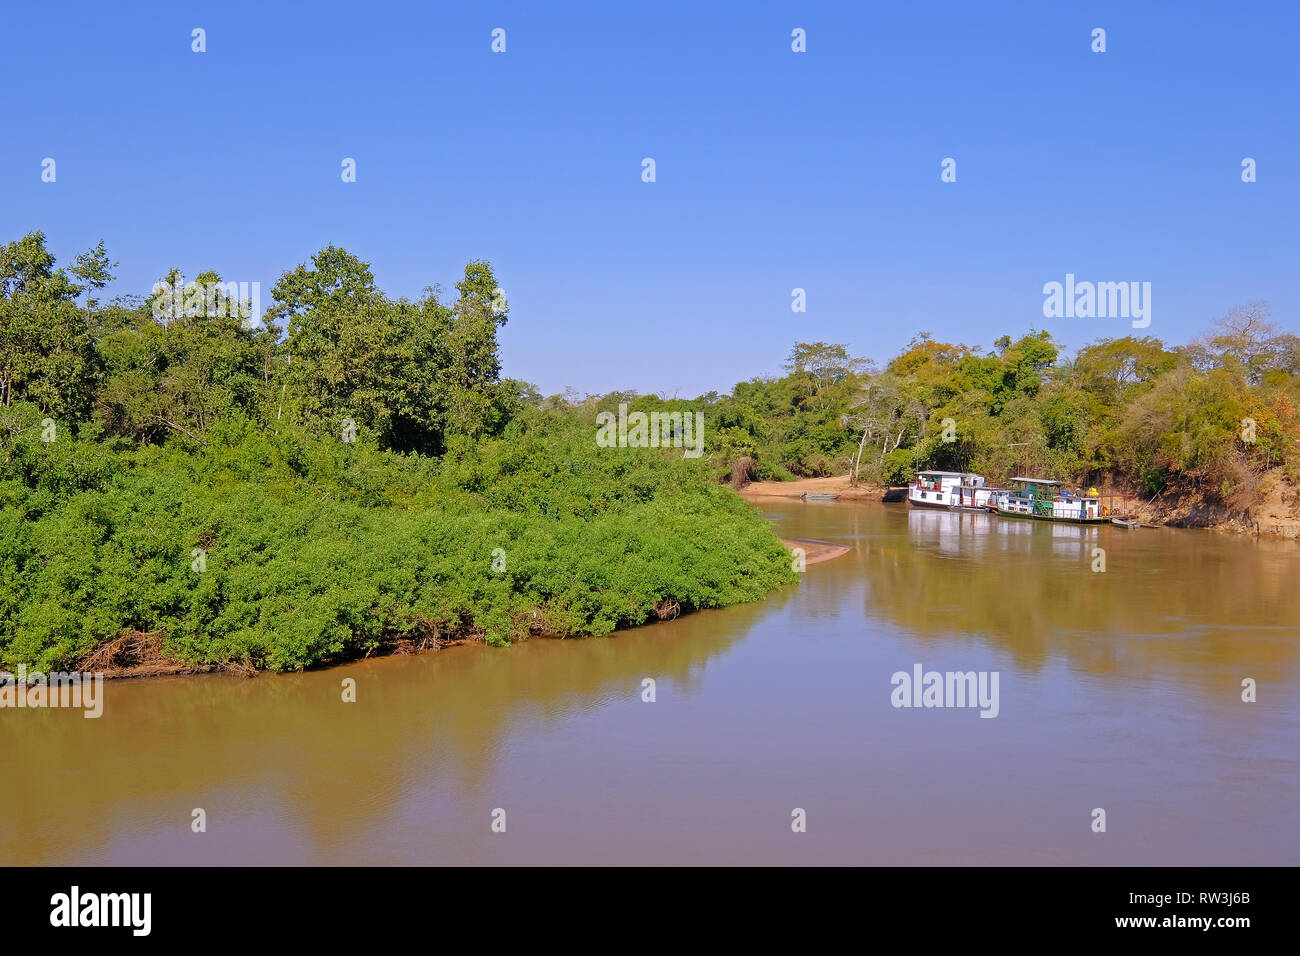 Densely forested shores of the Aquidauana river in the brazilian Pantanal, houseboats on the riverbank, Brazil Stock Photo